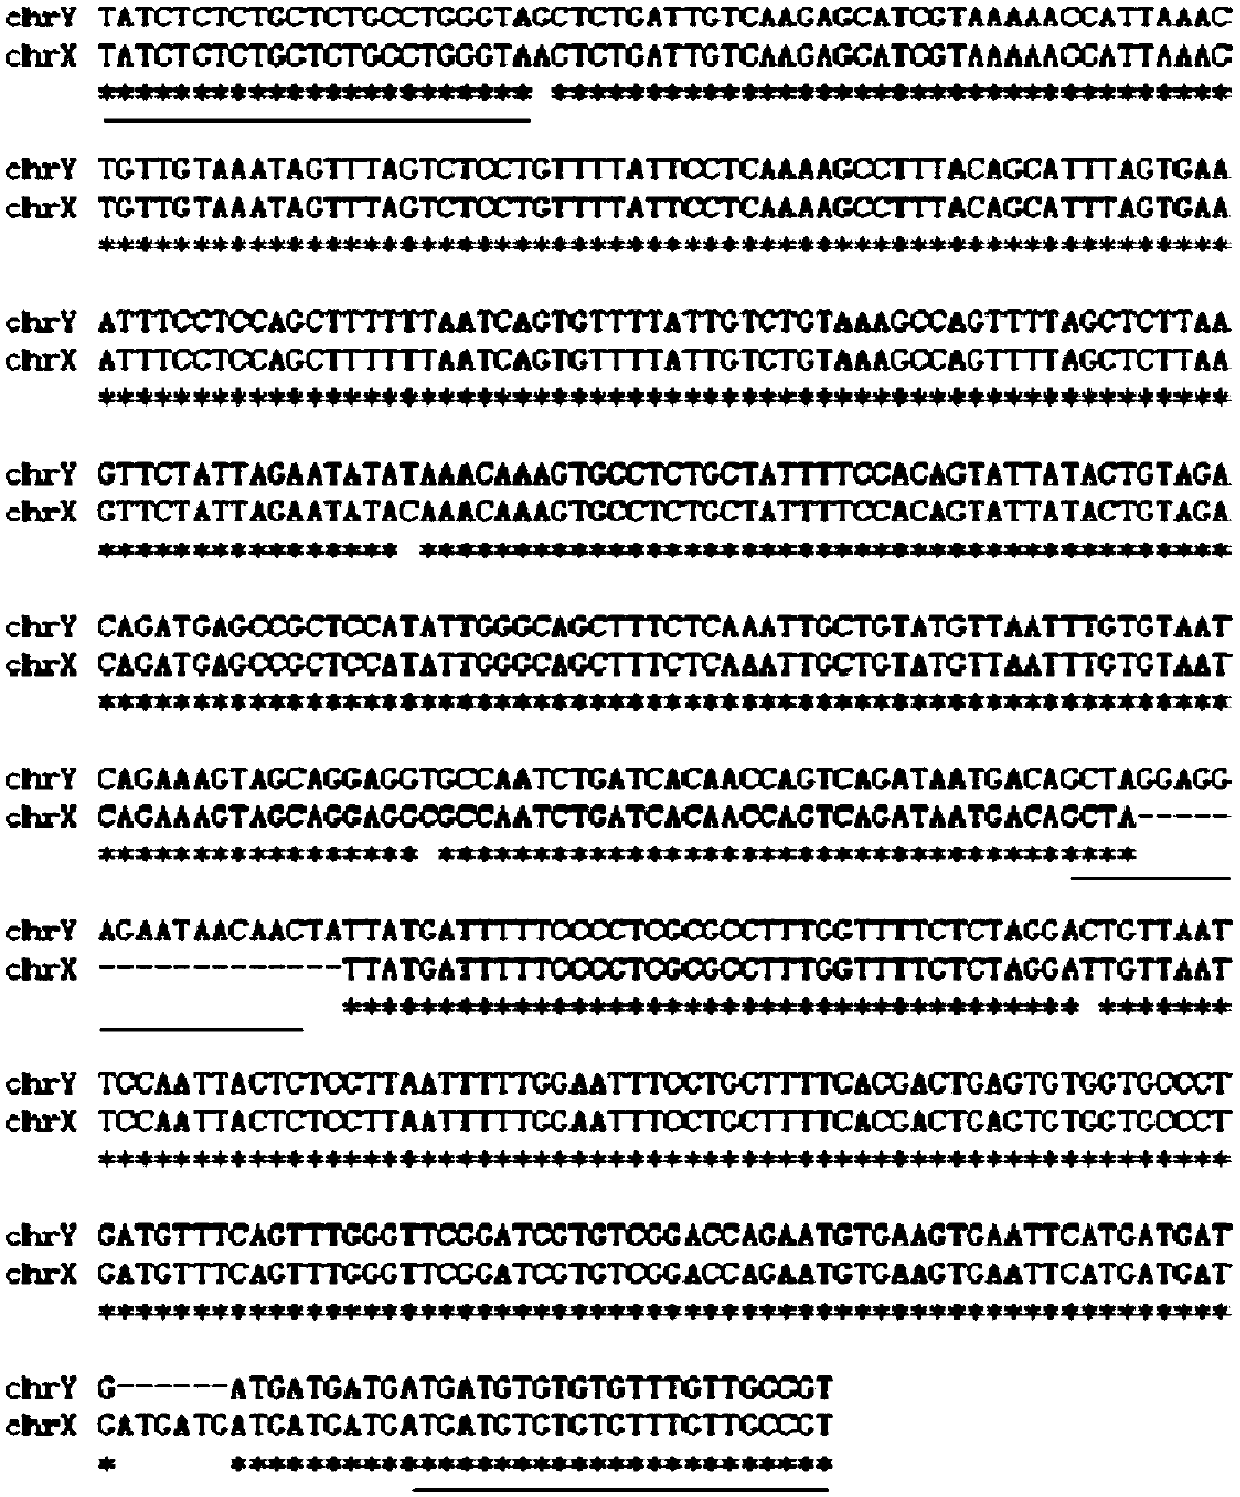 Male specific DNA marker of oplegnathus punctatus and method for identifying hereditary sex